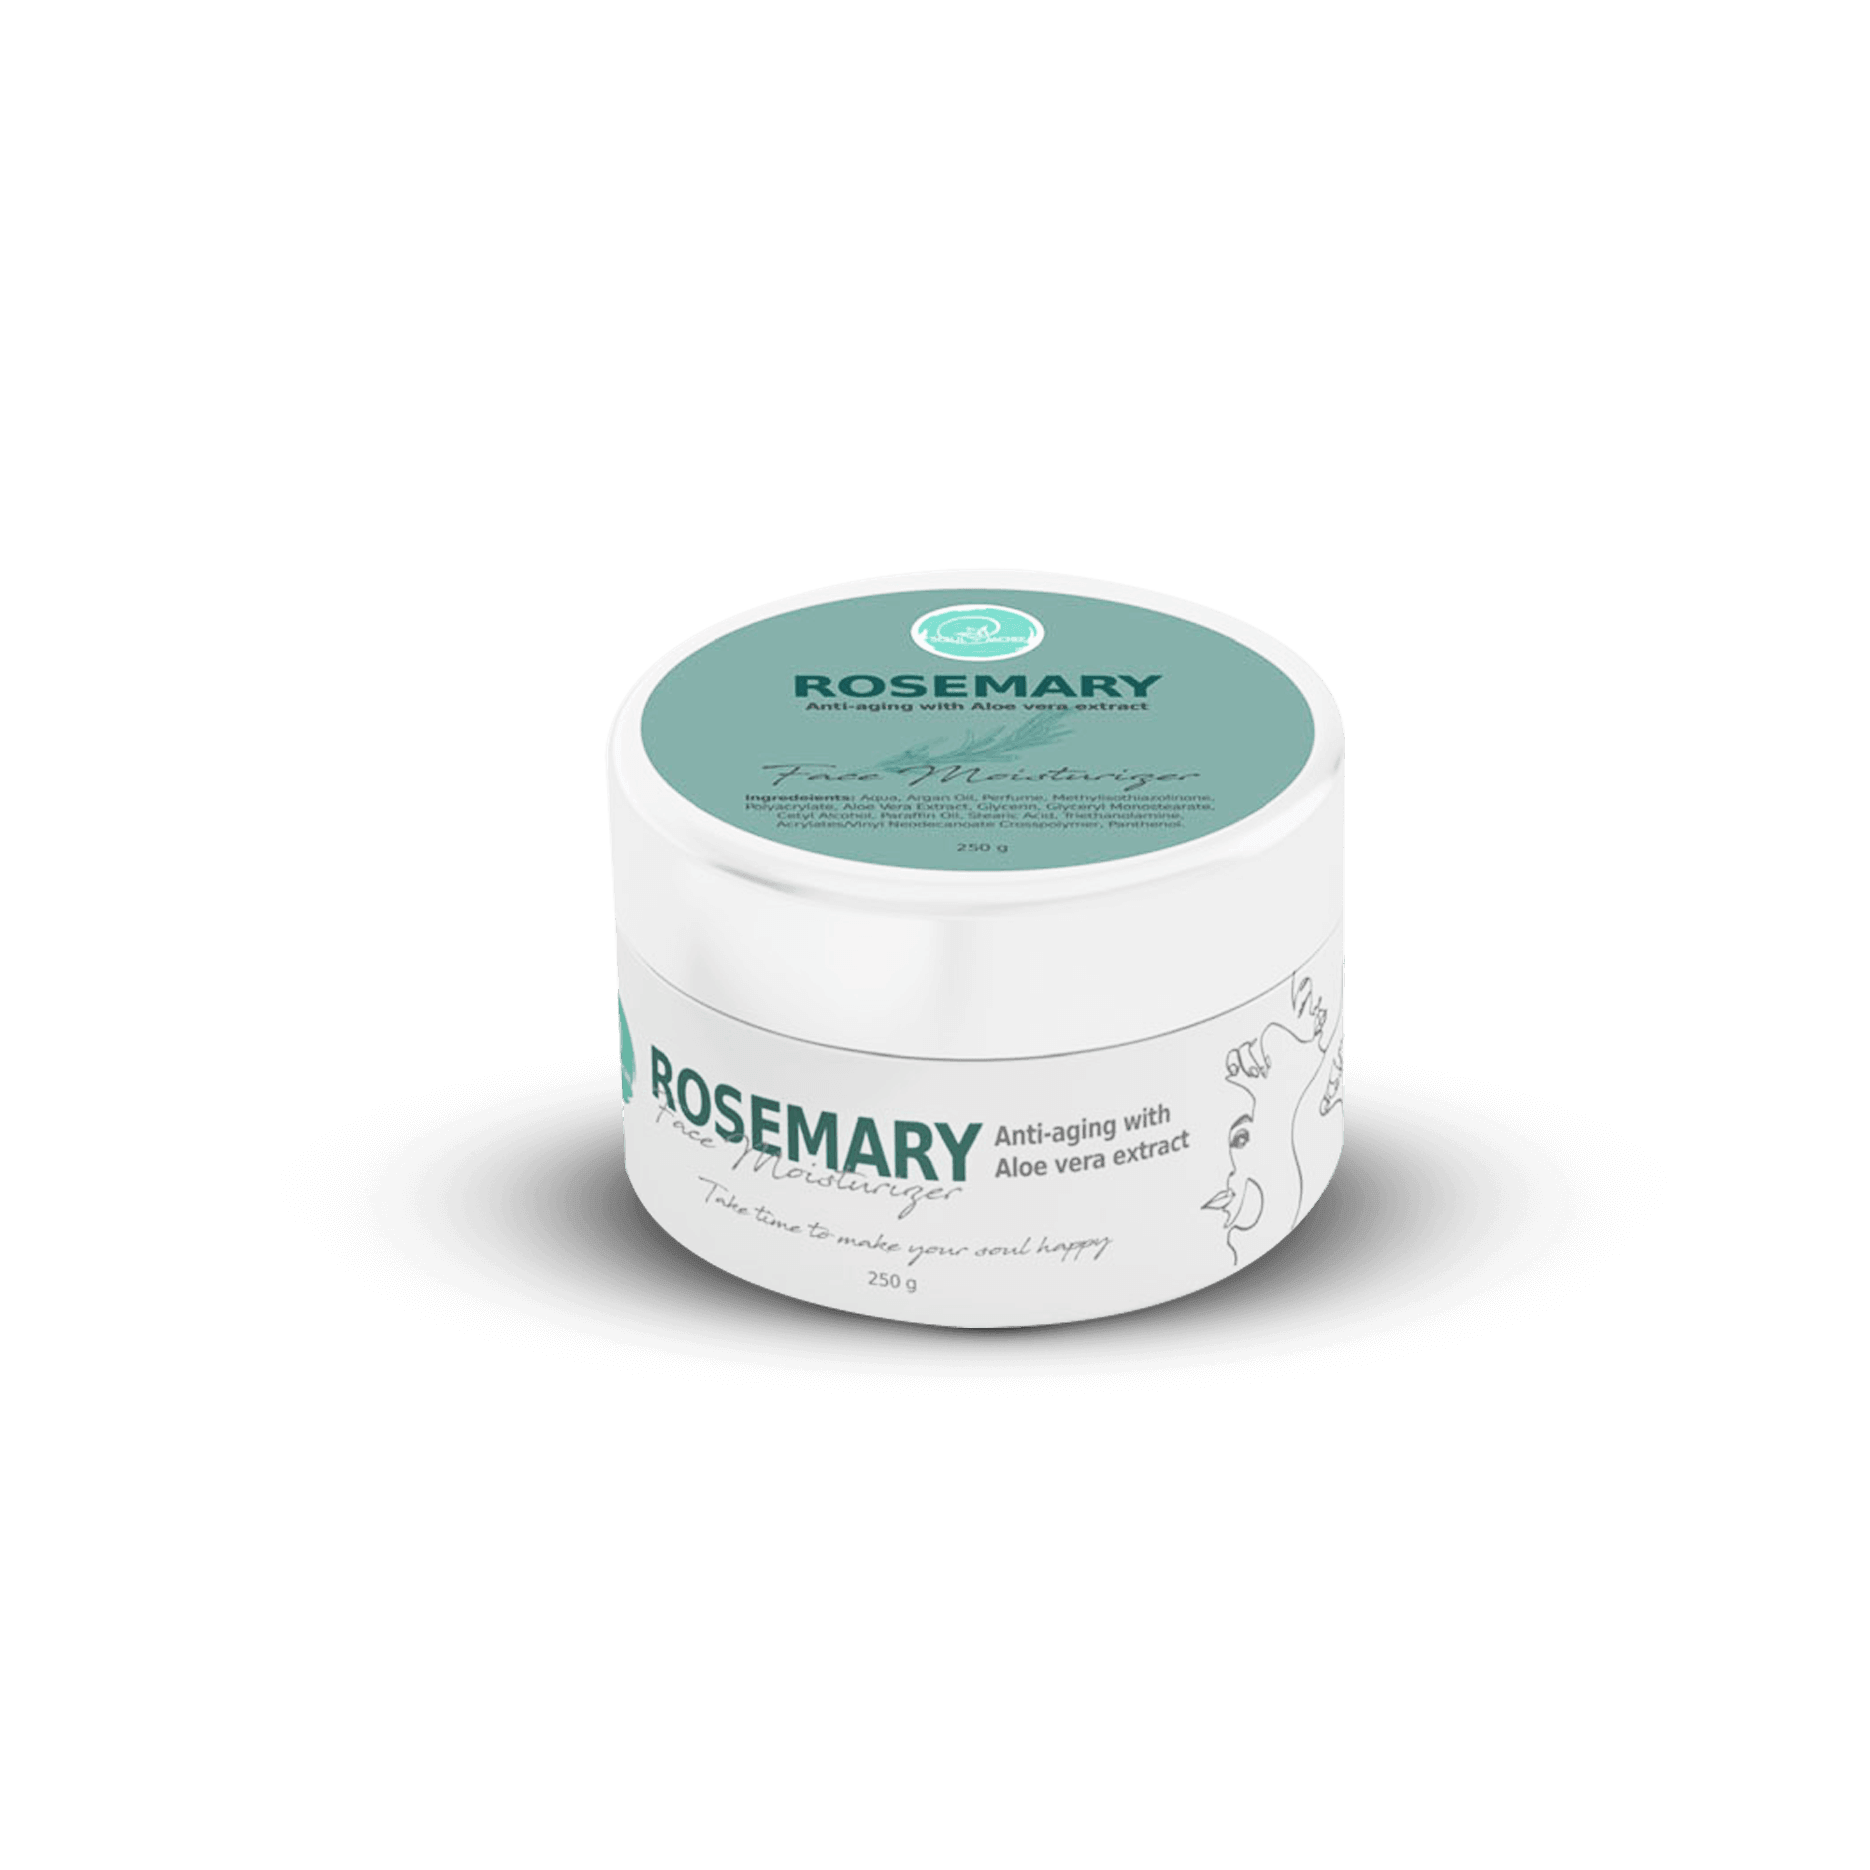 Soul & More Face Cream with Rosemary Small 50g - Beauty Bounty